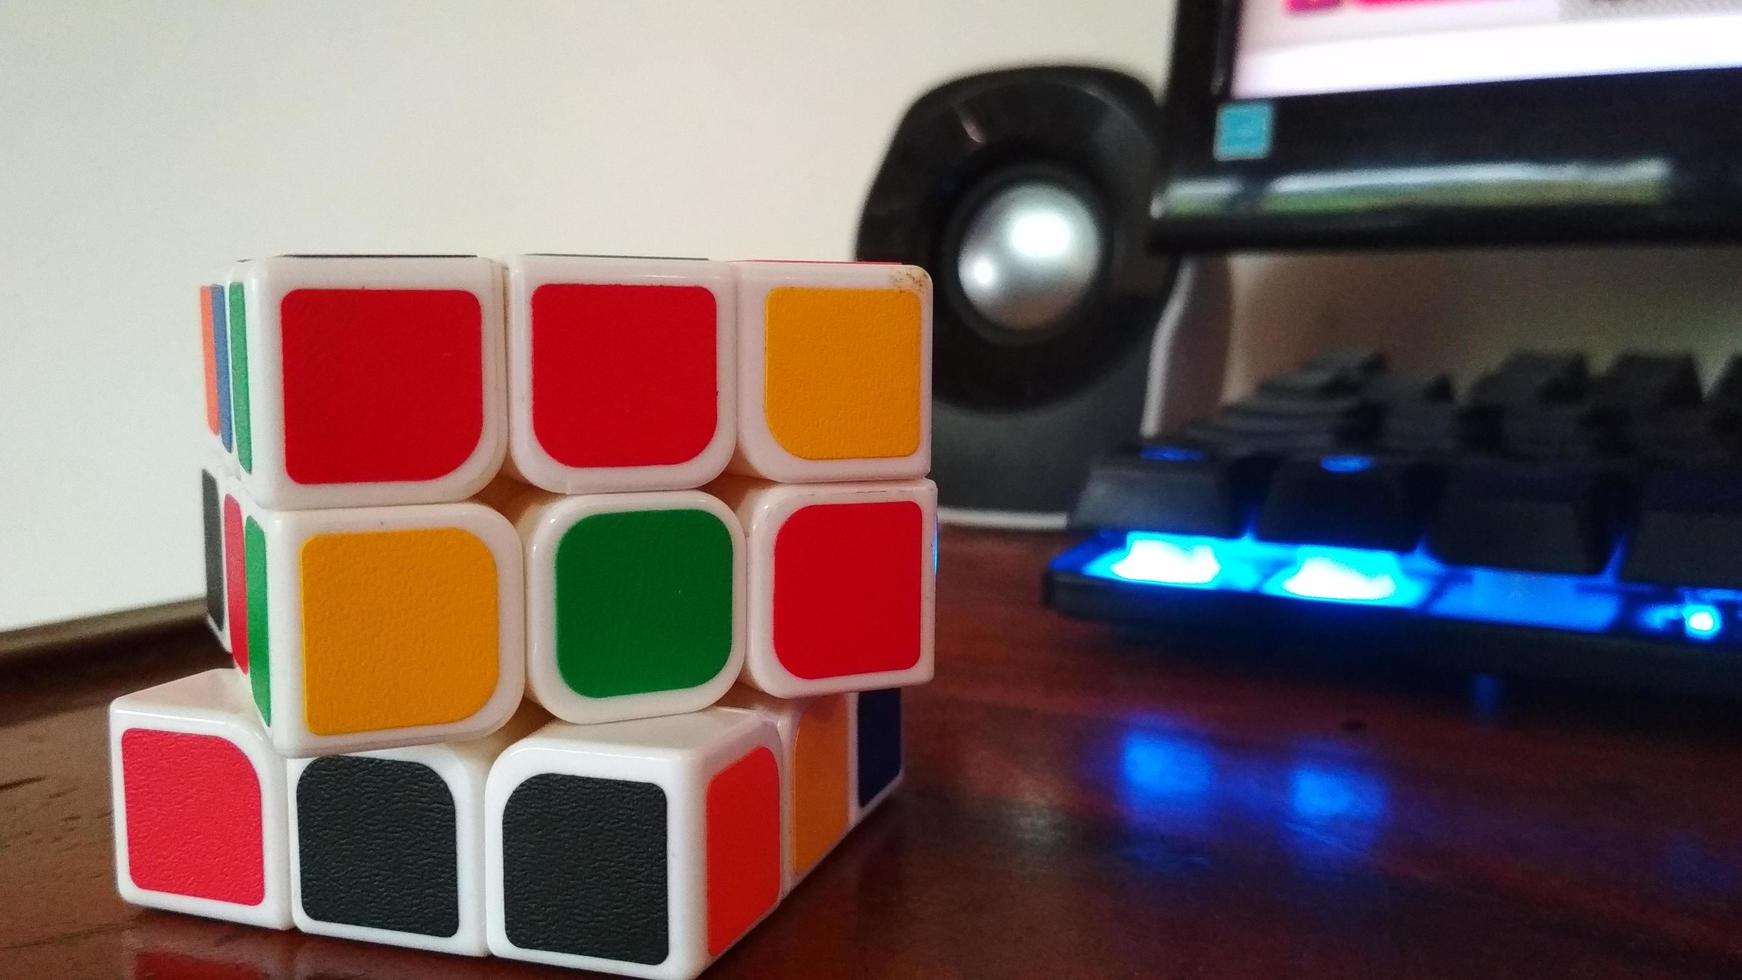 Color rubik's photo with glowing keyboard background